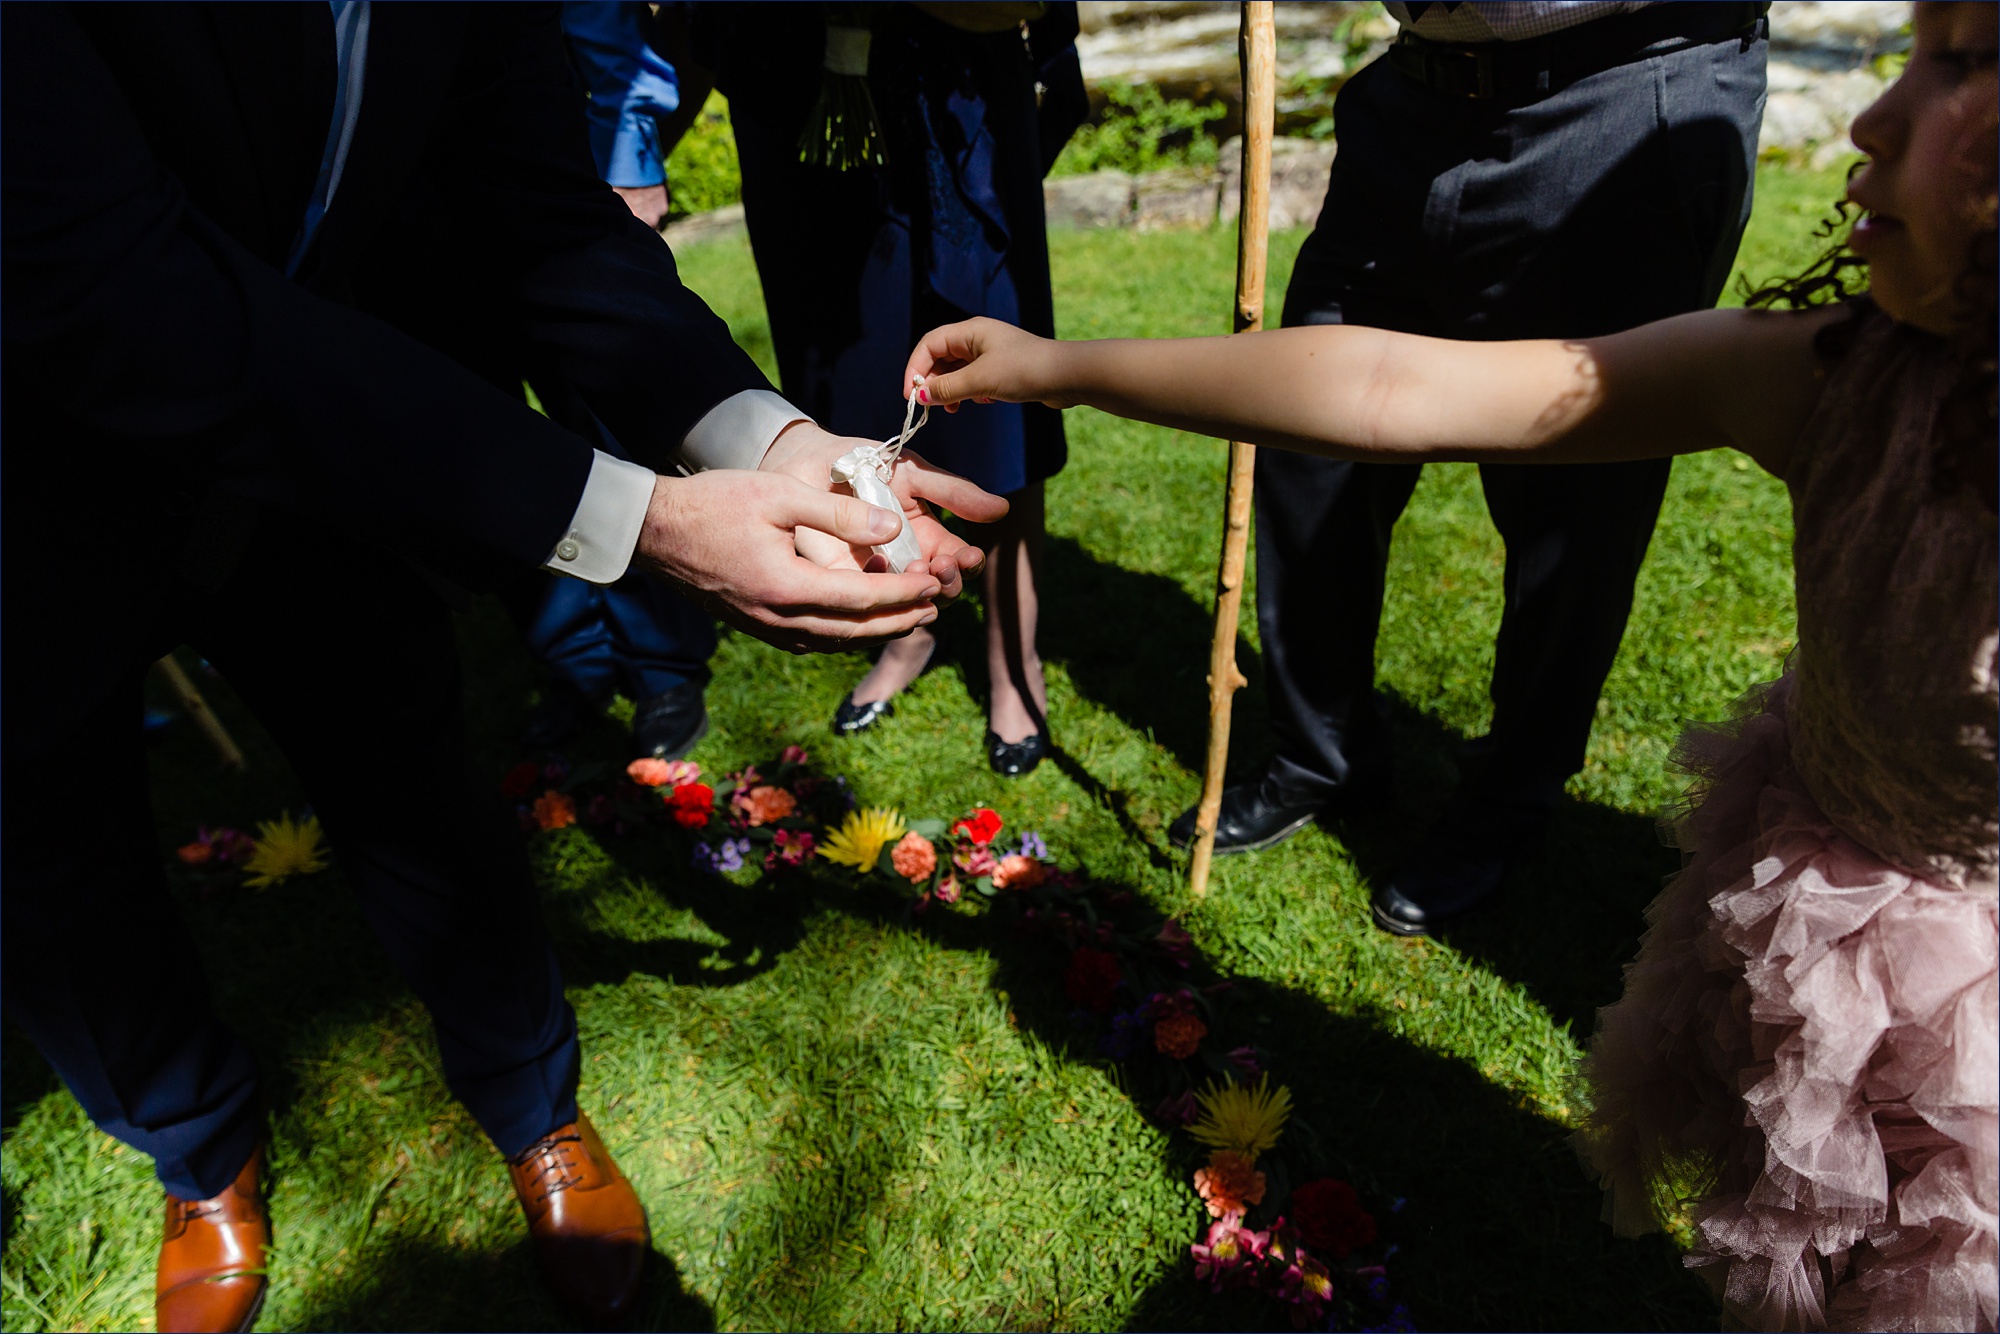 The niece of the bride hands the groom the rings for the New Hampshire elopement ceremony on a sunny day